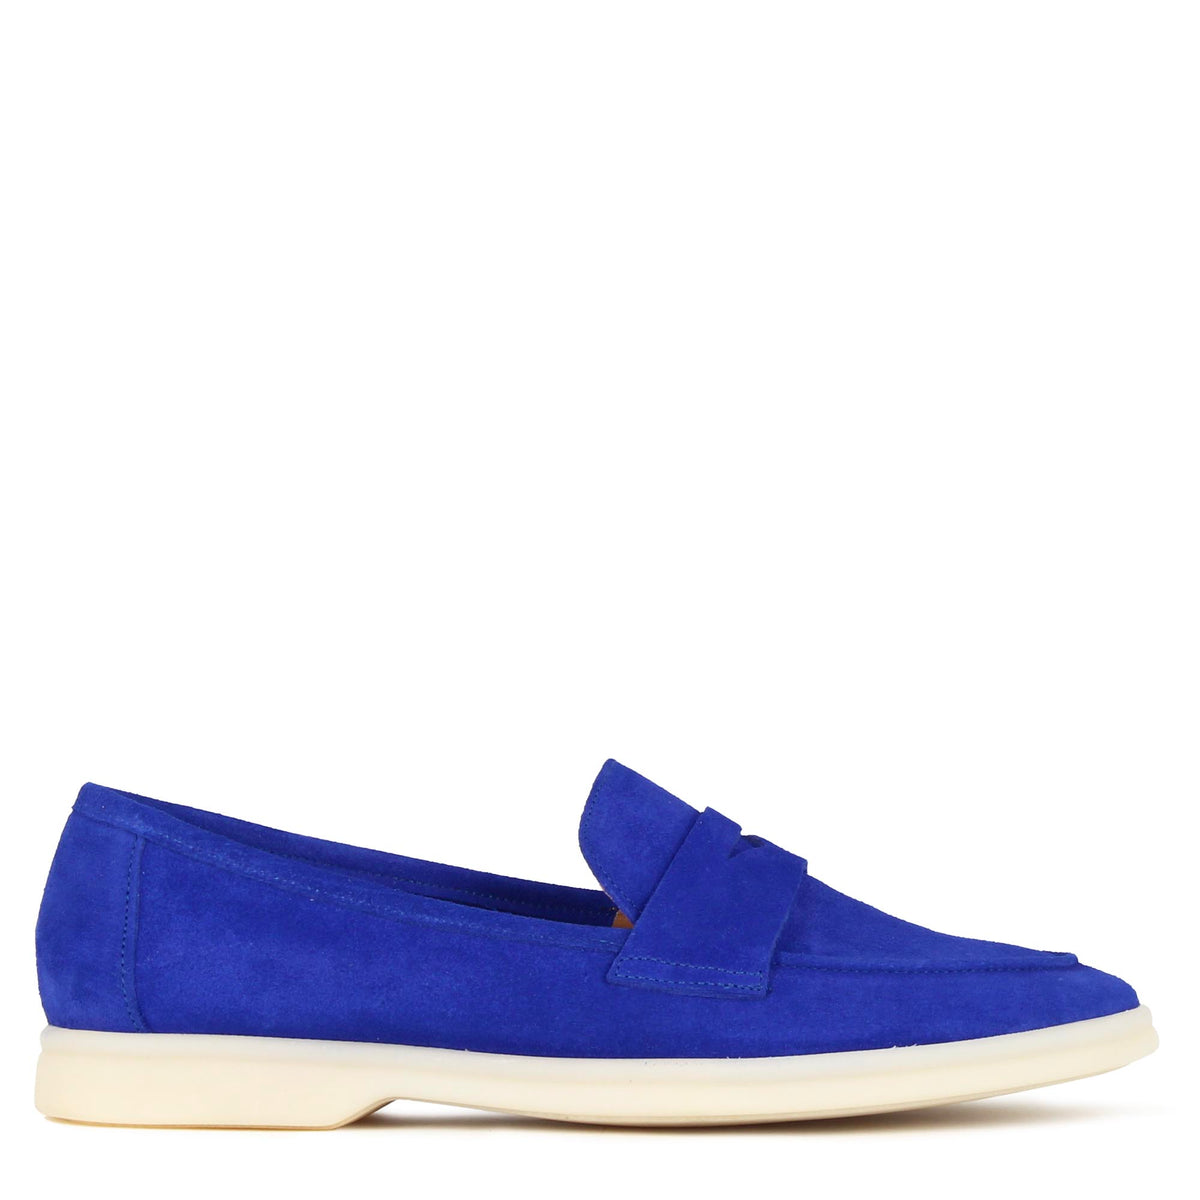 Classic women's moccasin in blue suede